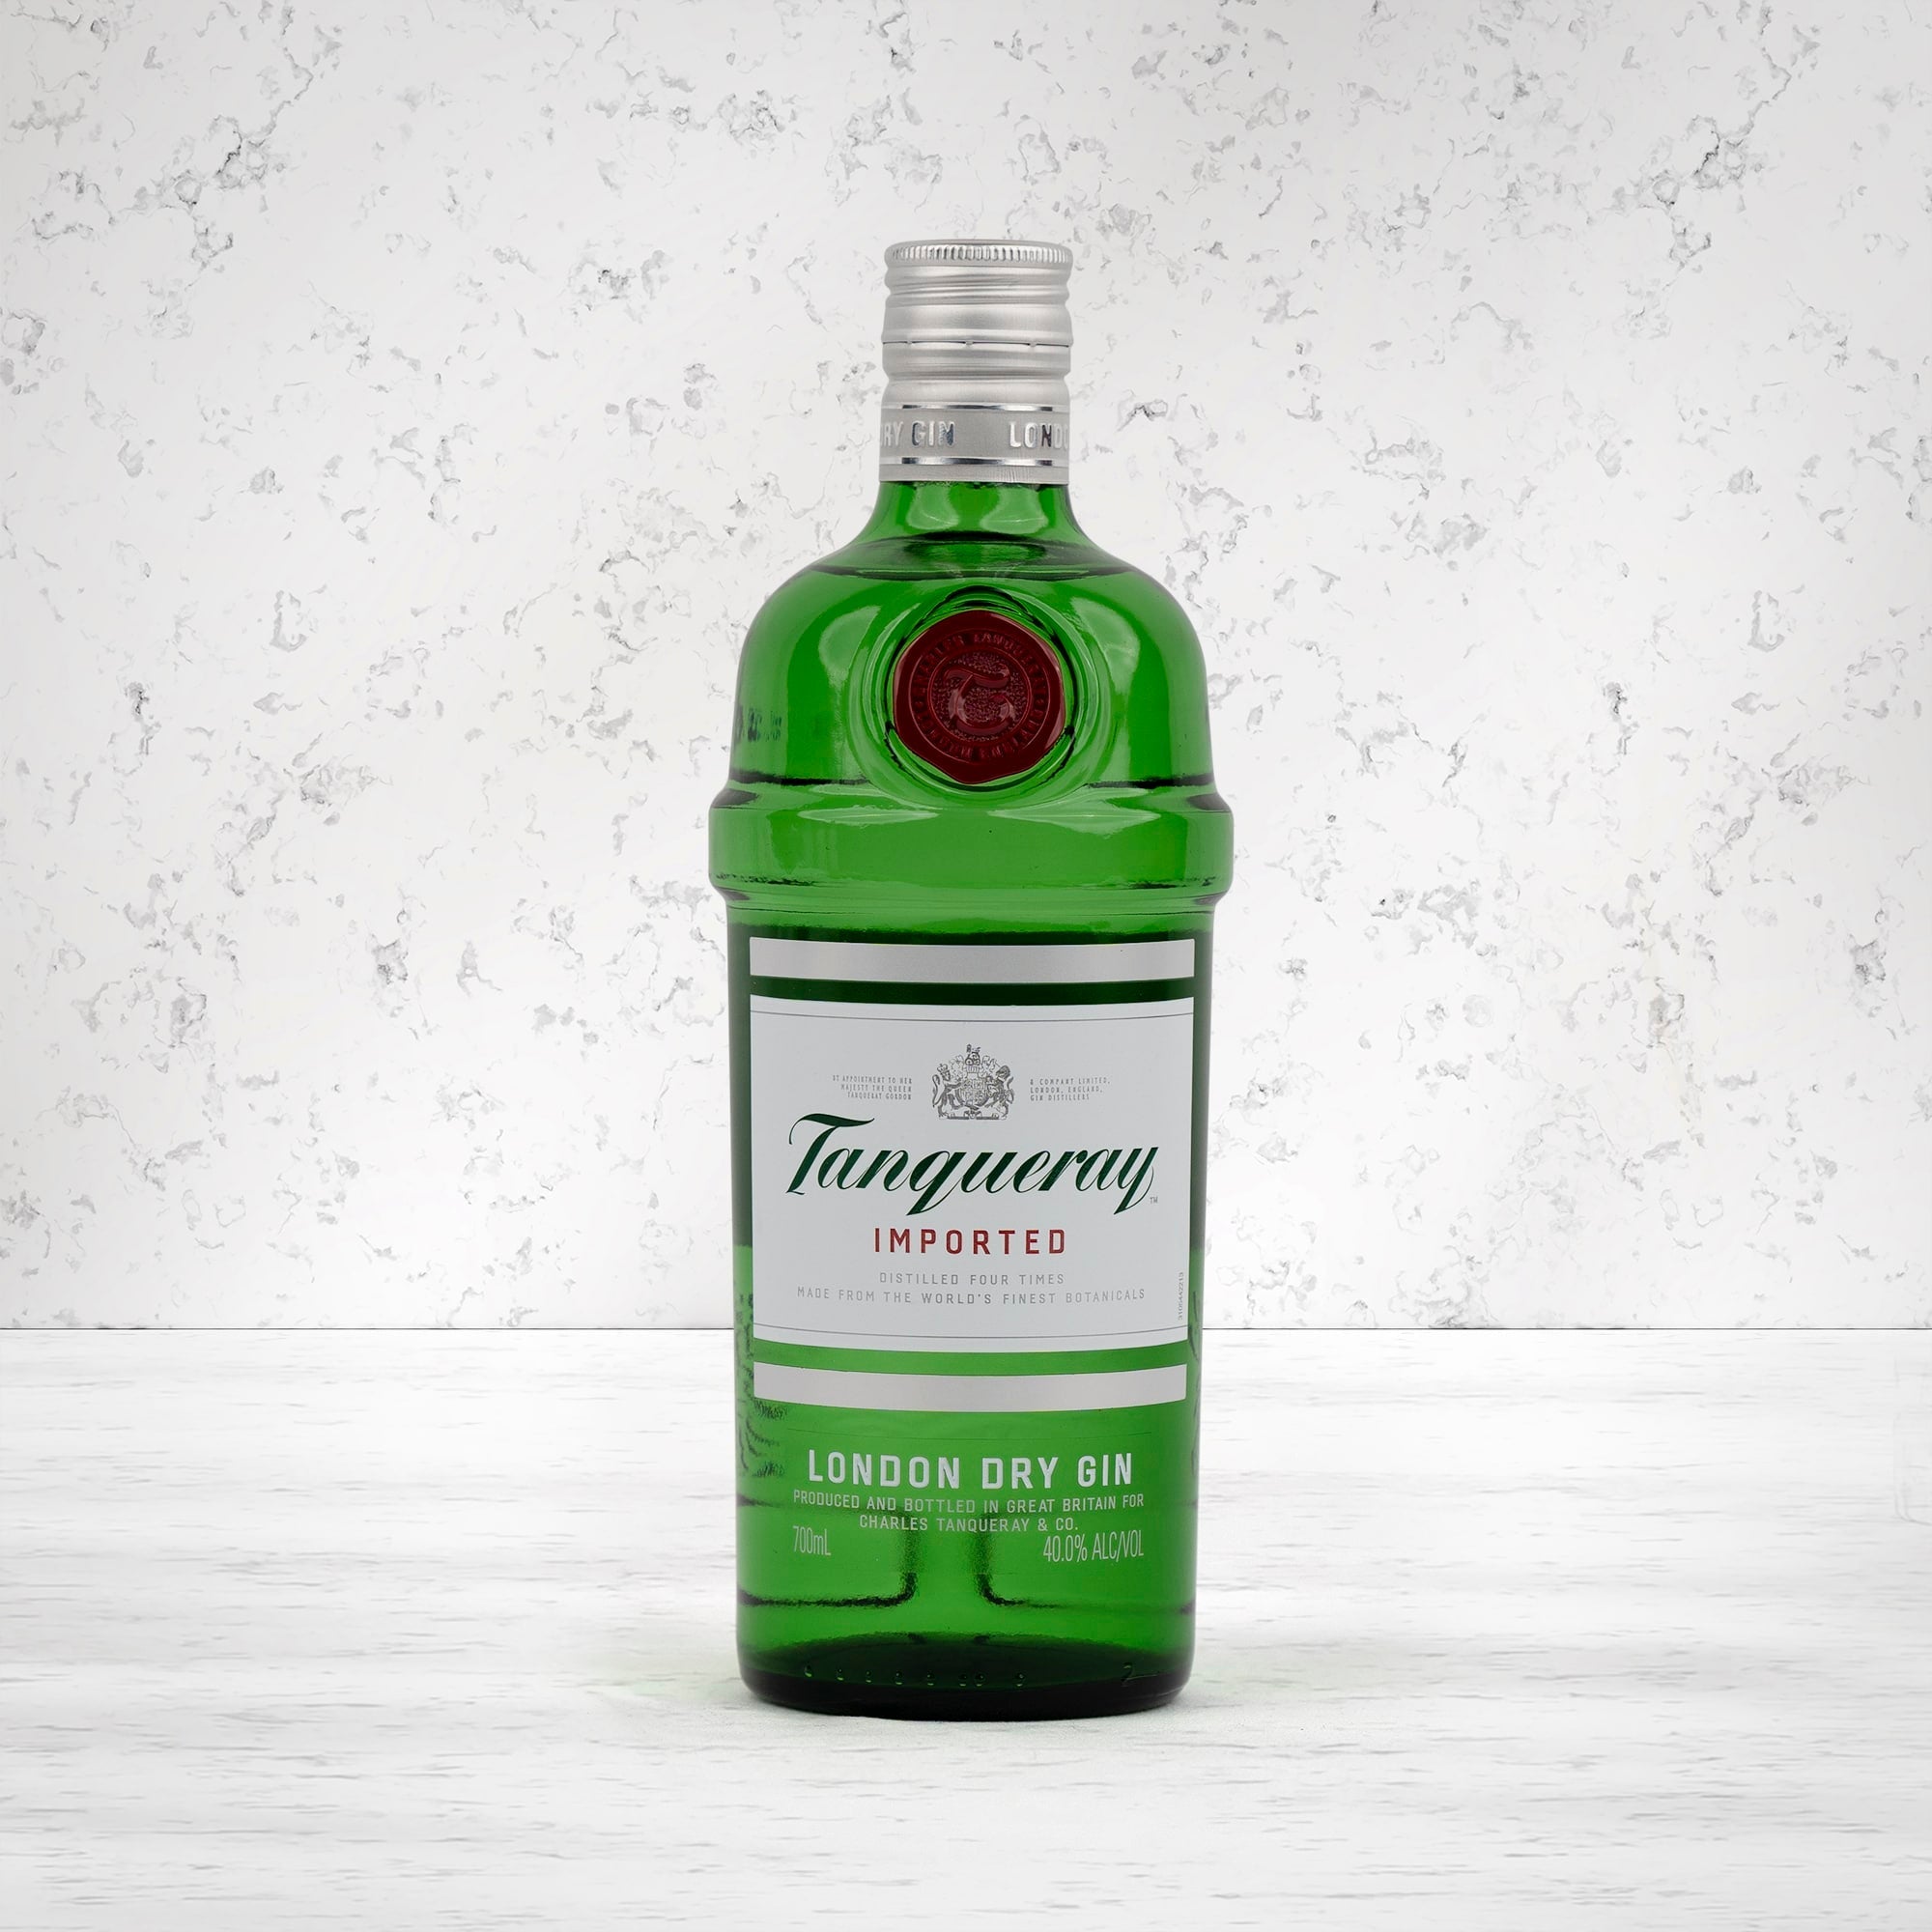 Tanqueray London Dry Gin - The Hamper Boutique Co